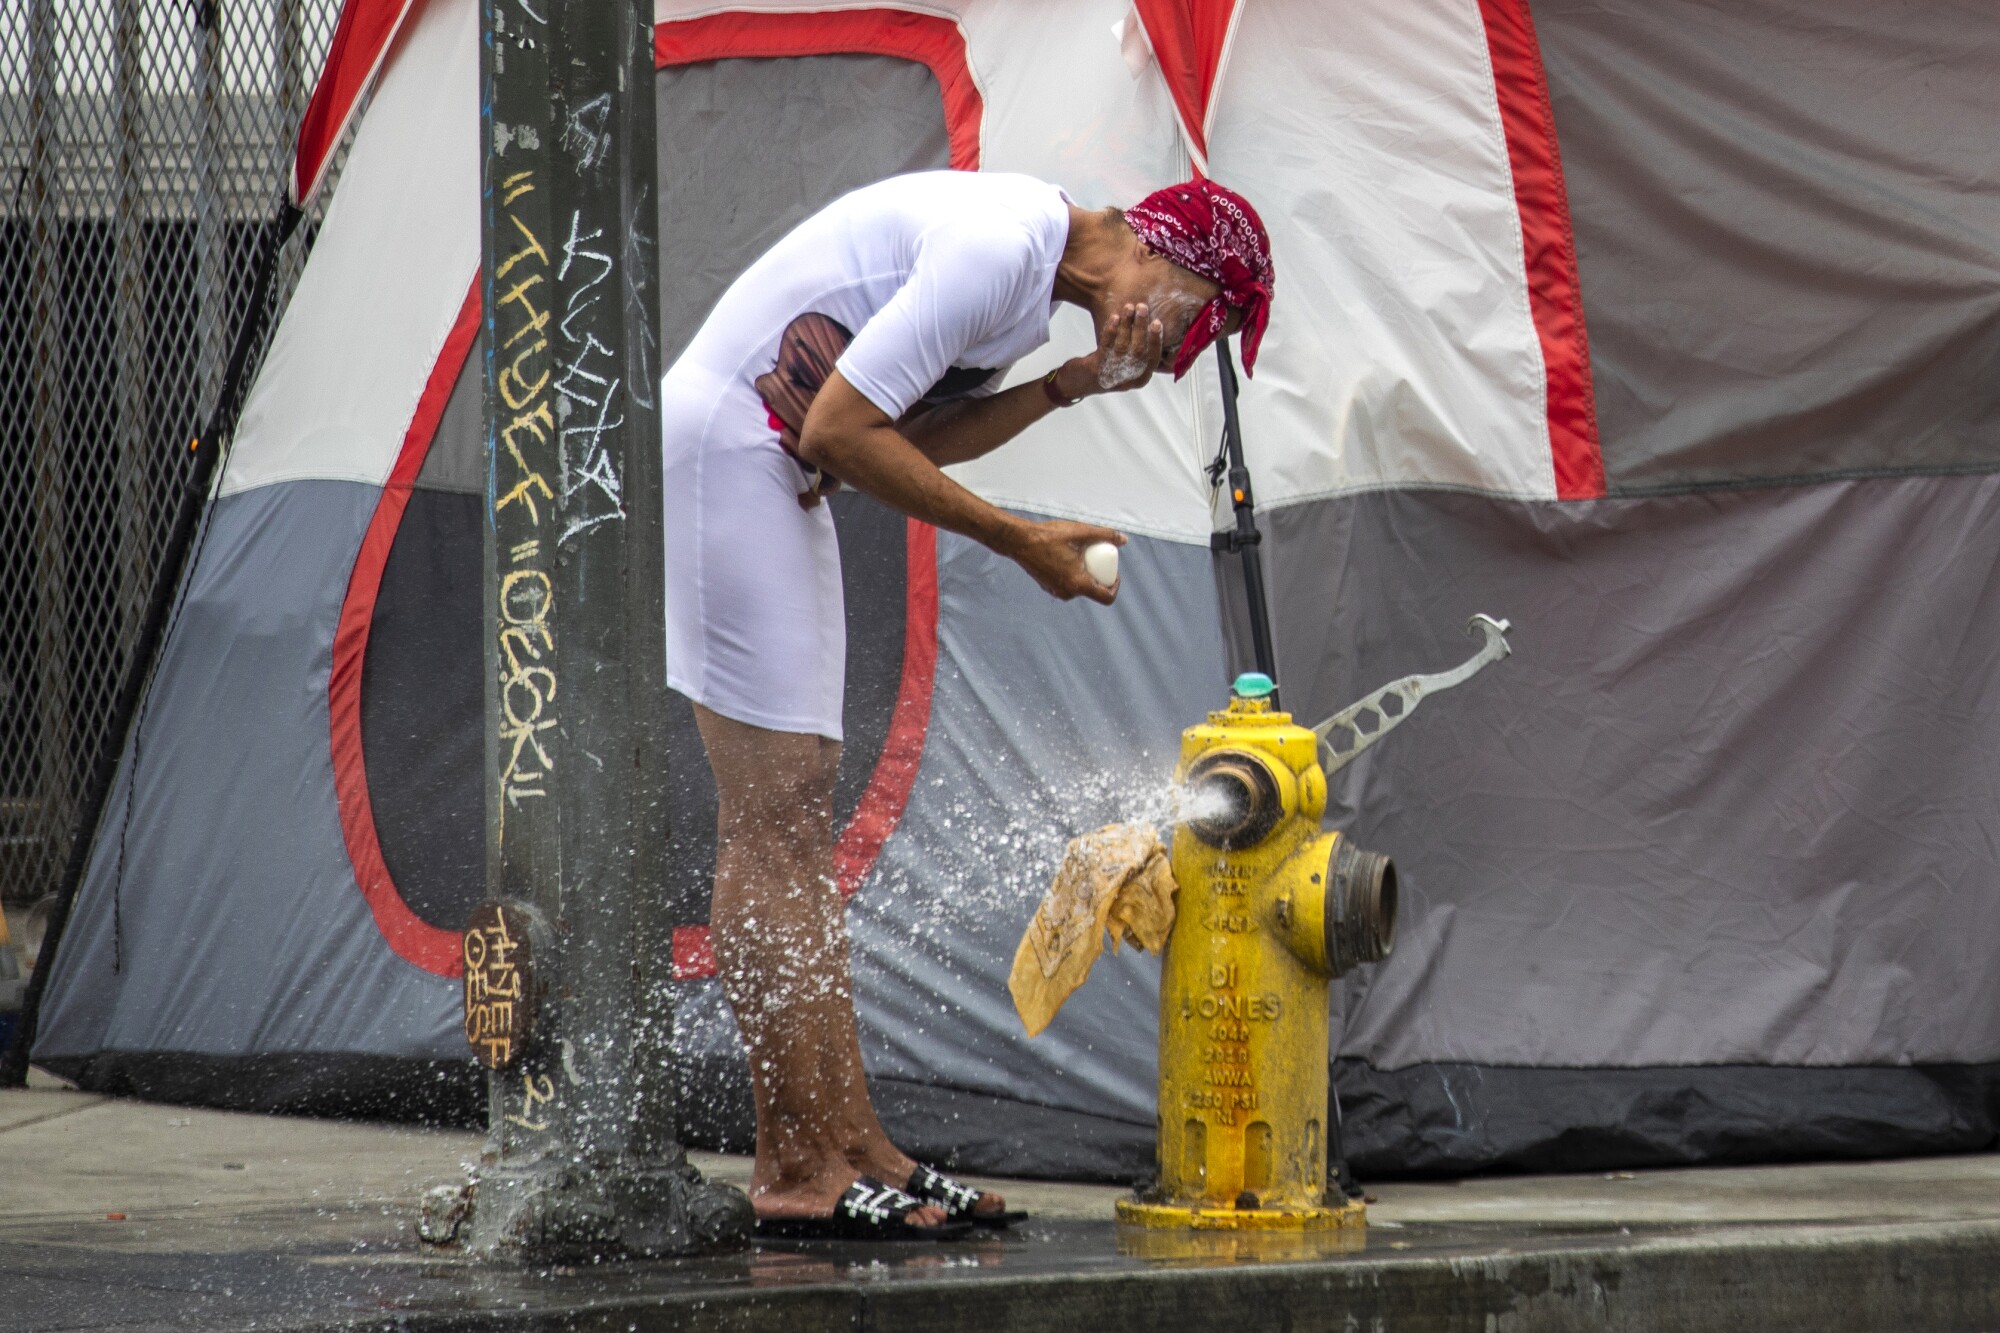 A woman washing her face near a fire hydrant